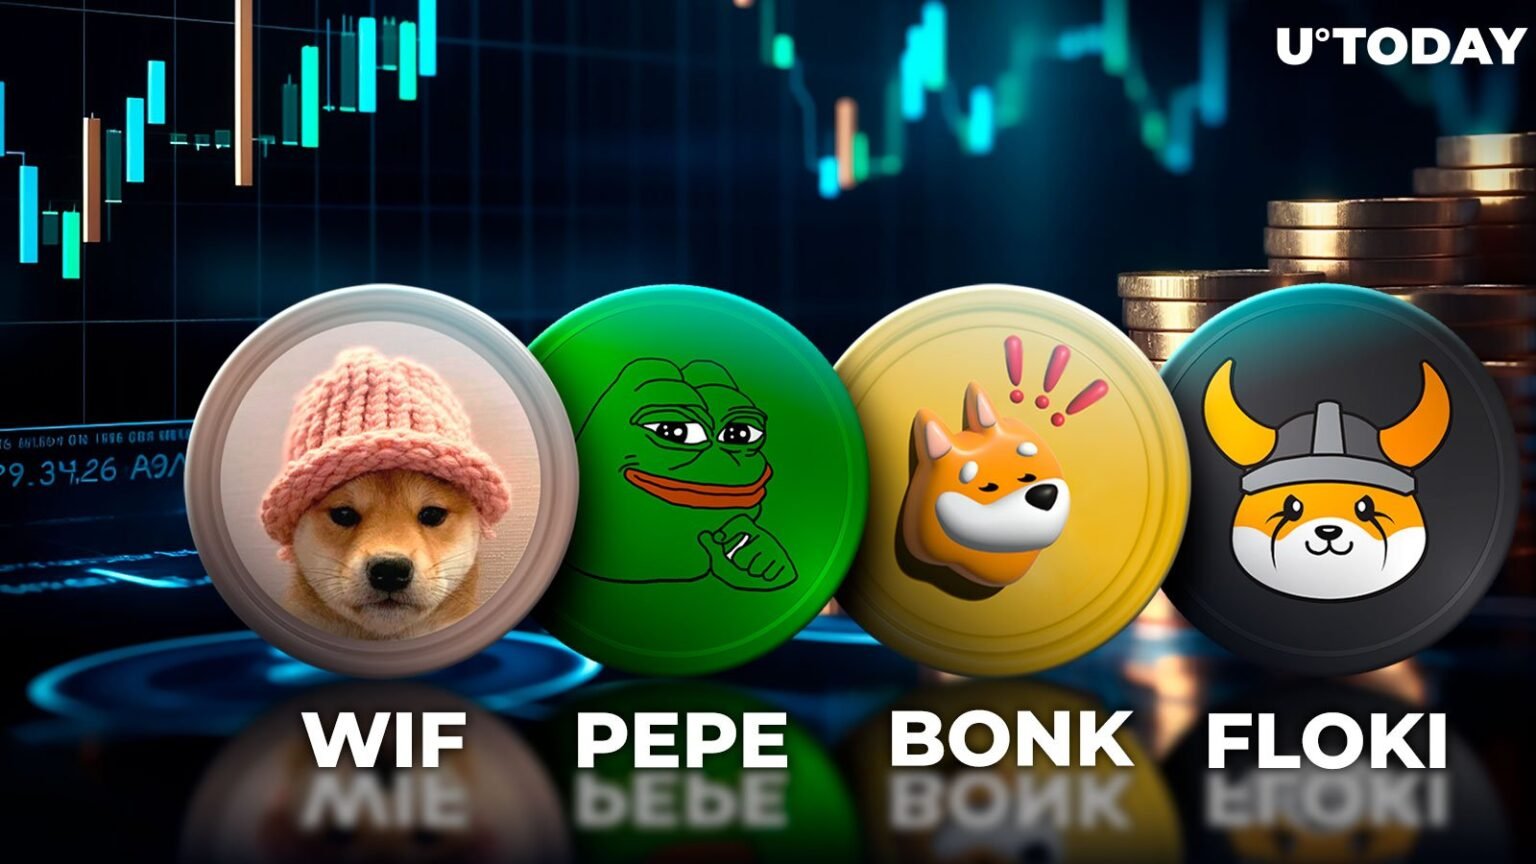 meme-coin-mania:-tracking-the-surge-of-dogecoin,-shiba-inu,-trump-tokens-and-more